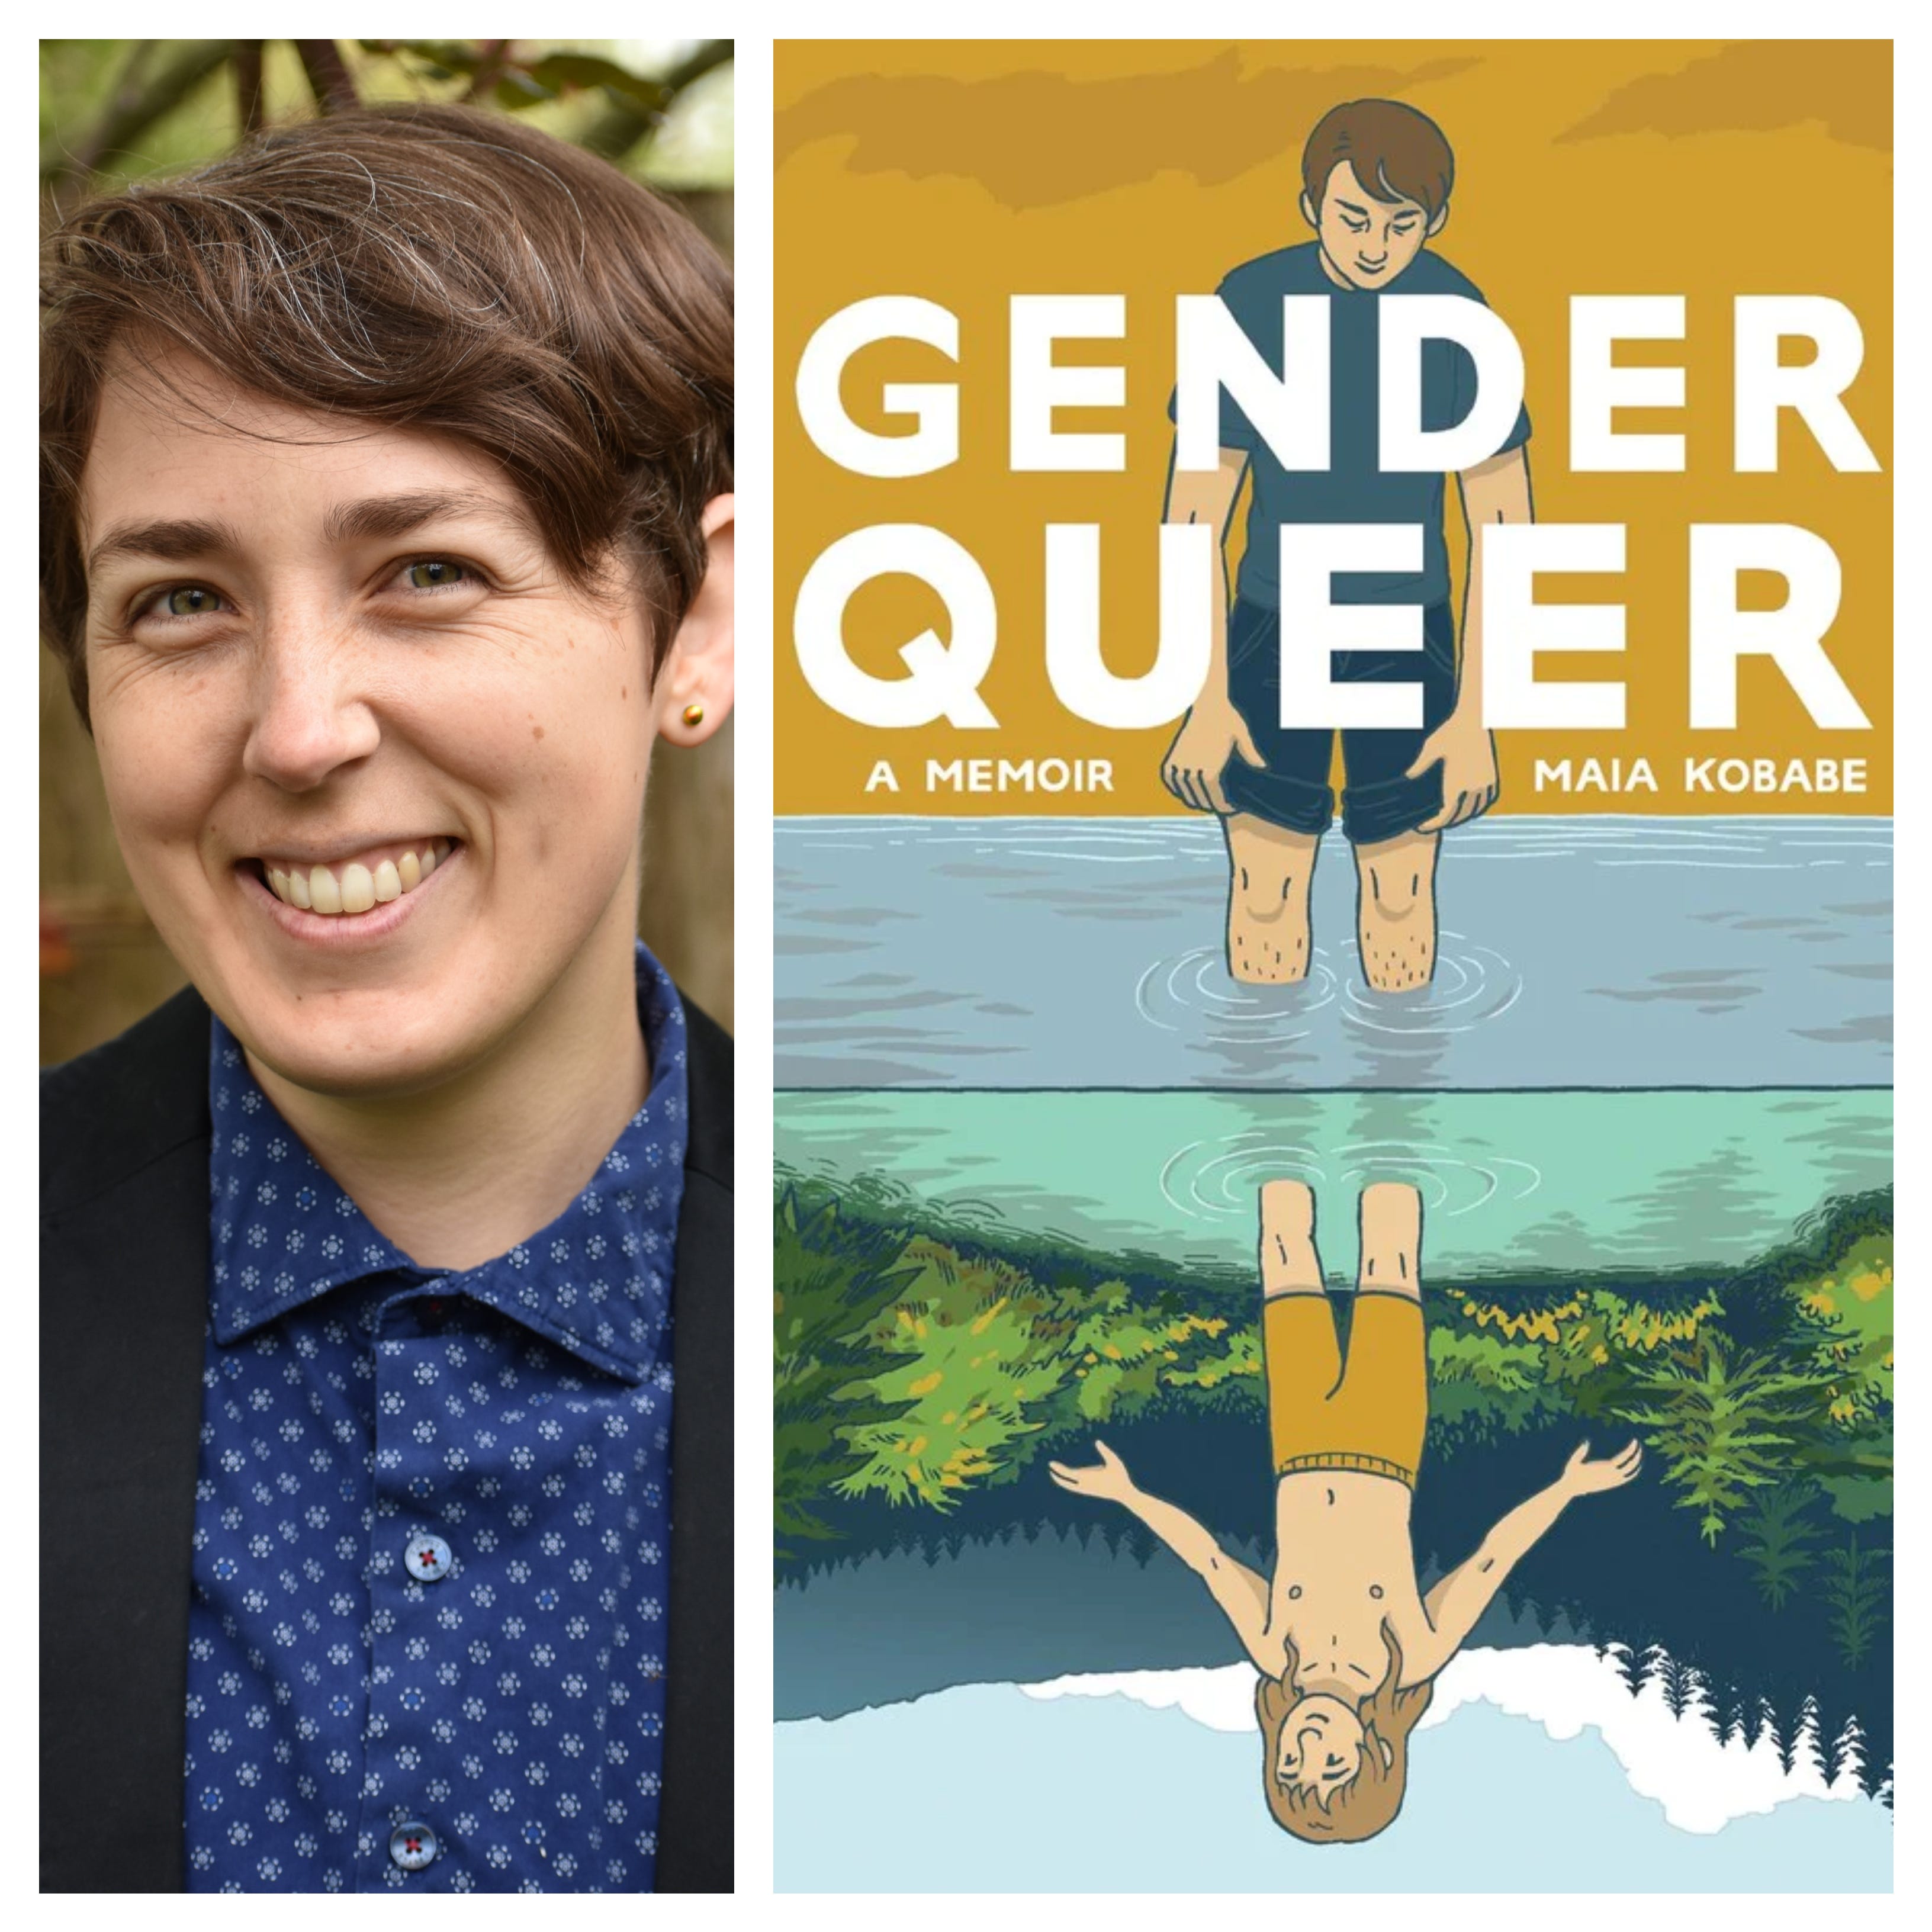 Maia Kobabe, author of "Gender Queer."